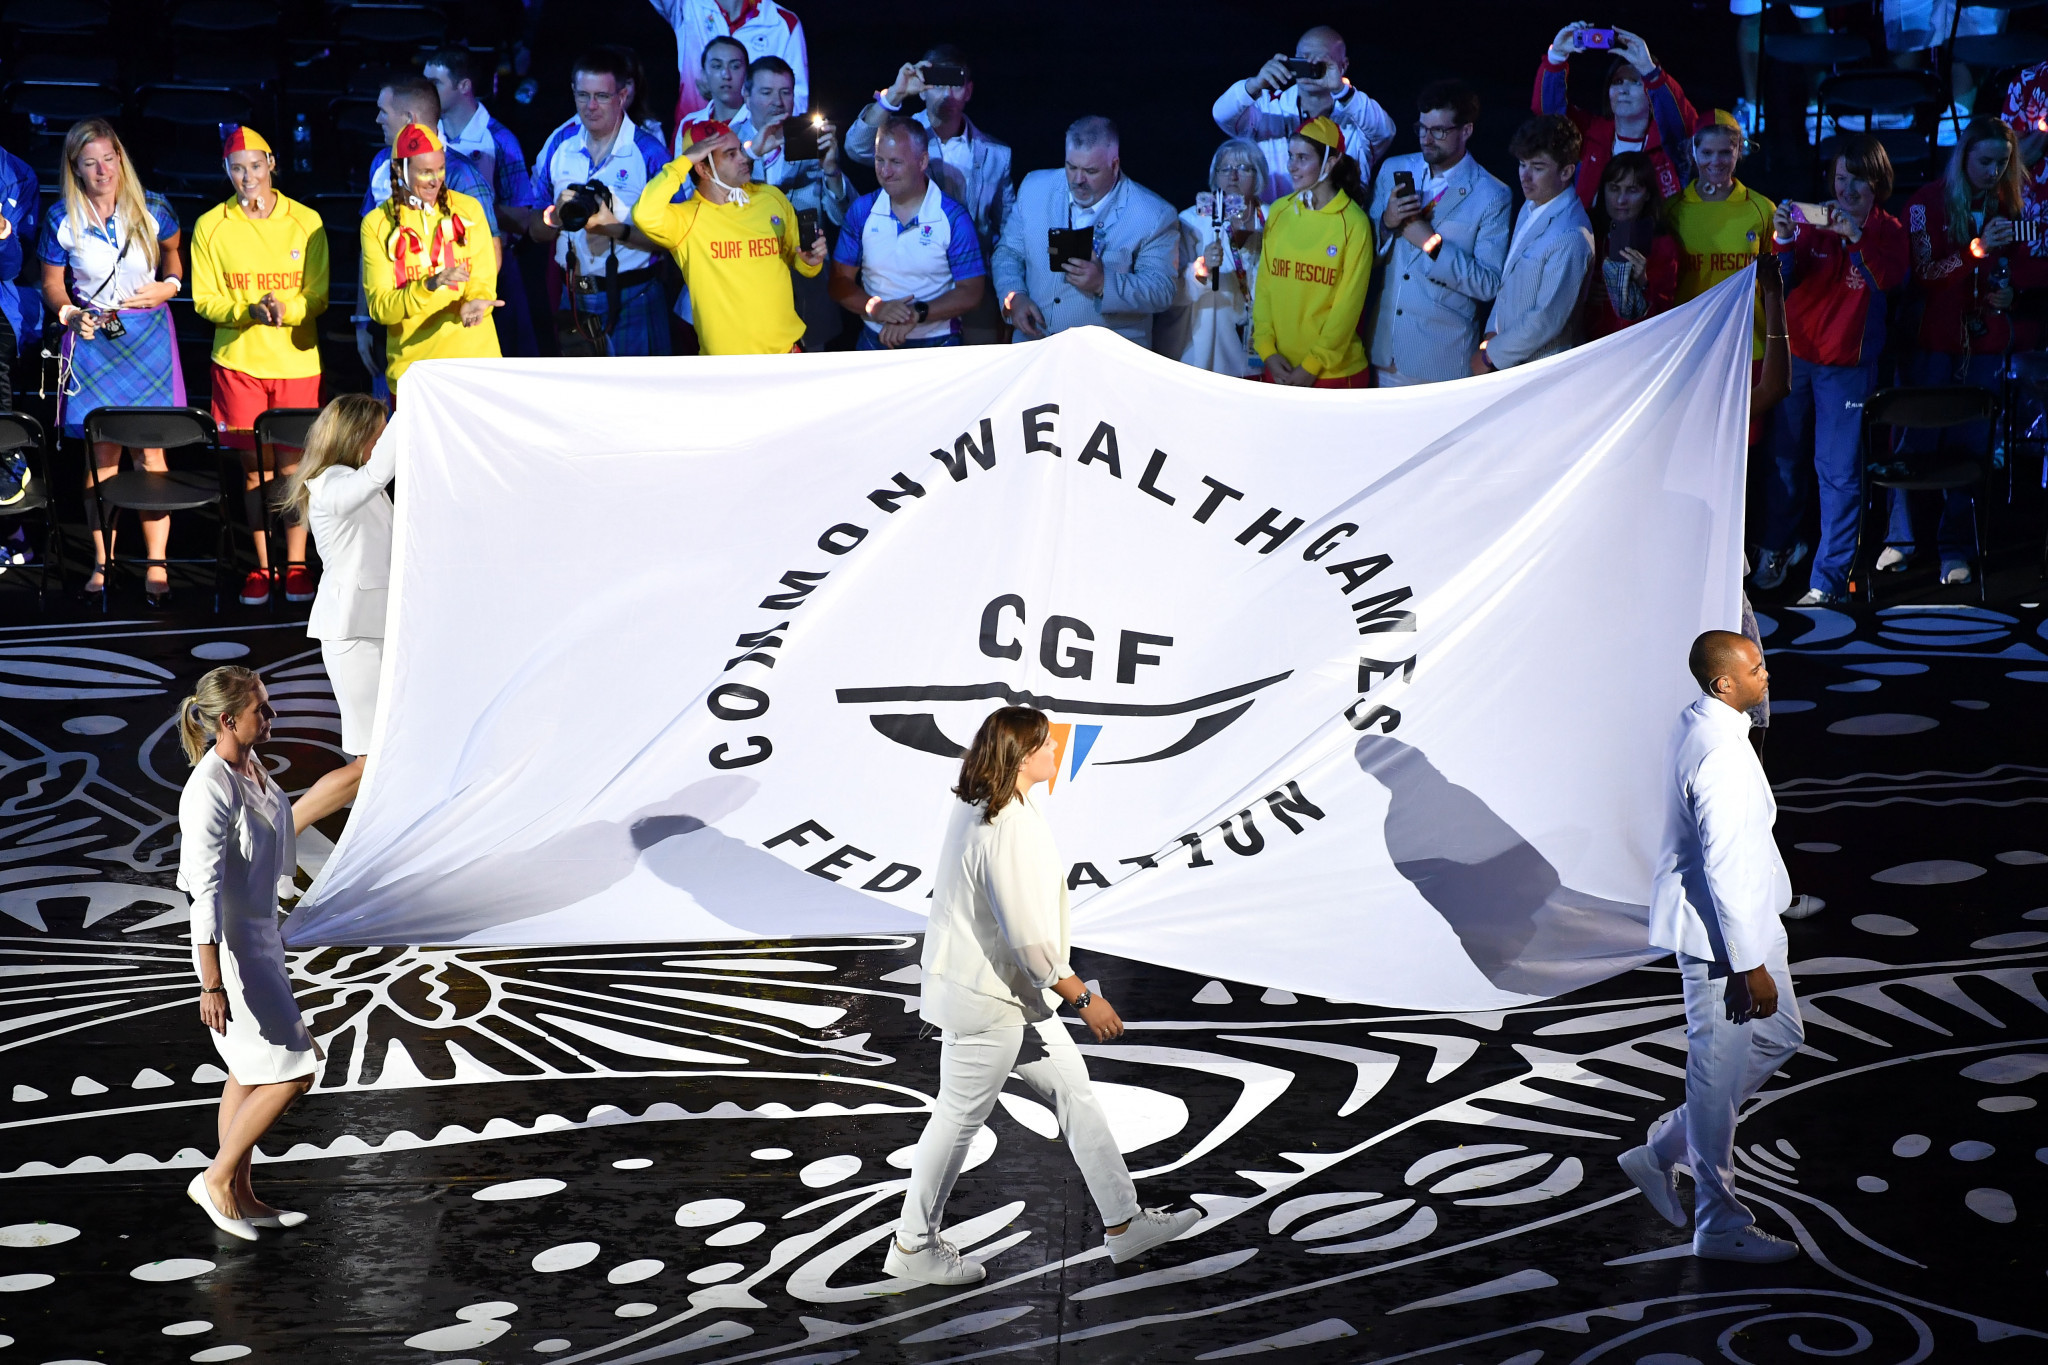 The Commonwealth Games Federation has started its search for a new chef executive ©CGF